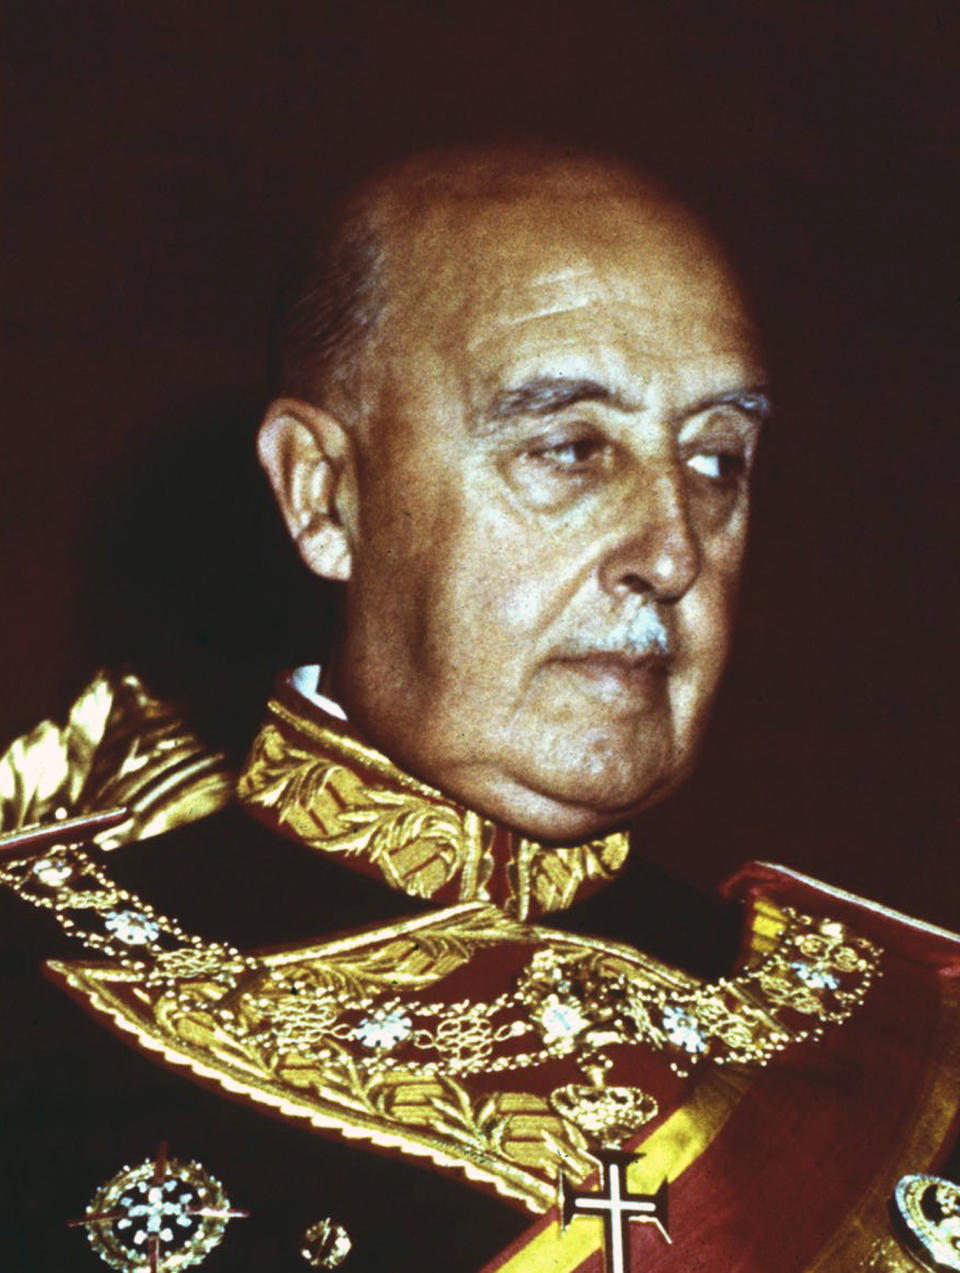 FILE, undated file photo of former Spanish dictator Francisco Franco. After a tortuous judicial and public relations battle, Spain's Socialist government has announced that Gen. Francisco Franco's embalmed body will be relocated from a controversial shrine to a small public cemetery where the former dictator's remains will lie along his deceased wife. (AP Photo/file)